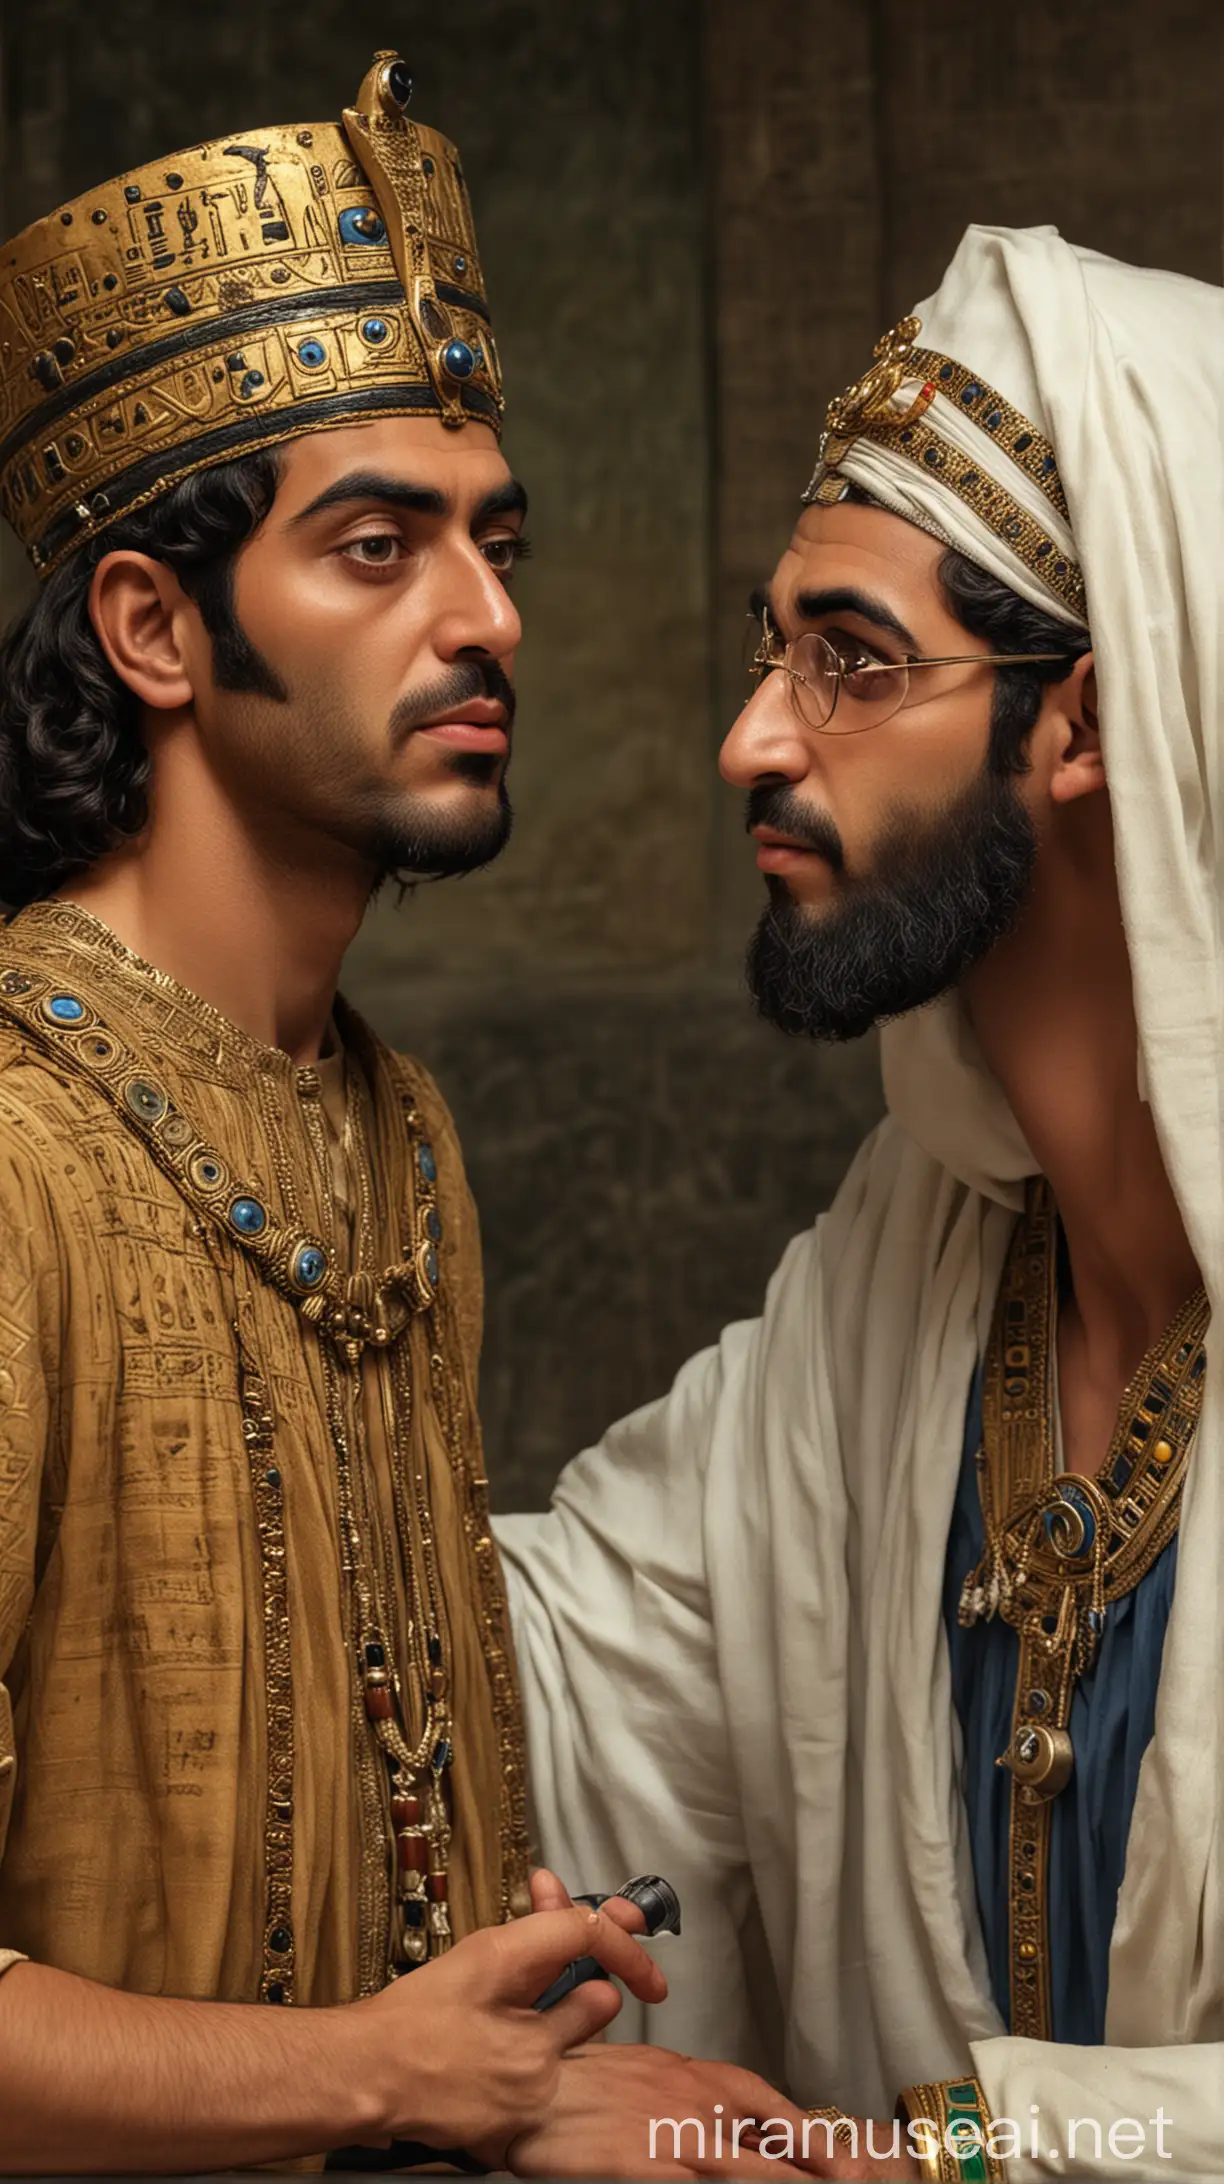 "A Persian king requesting an eye doctor from the Egyptian pharaoh." hyper realistic